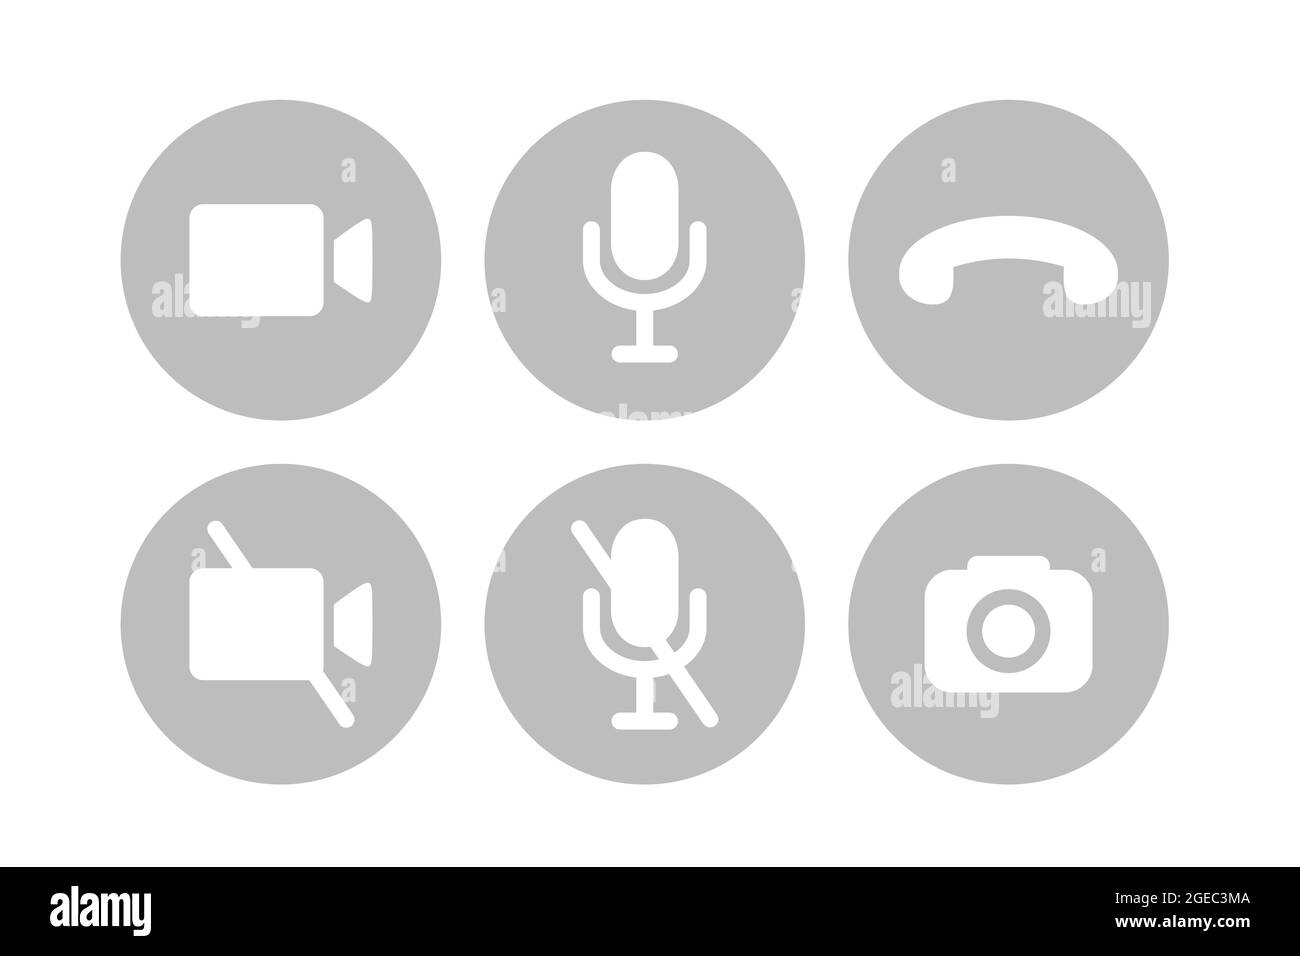 Virtual hangouts icons for conference call. On and off video, sound, camera and call icons isolated on white background. Flat vector illustration Stock Vector